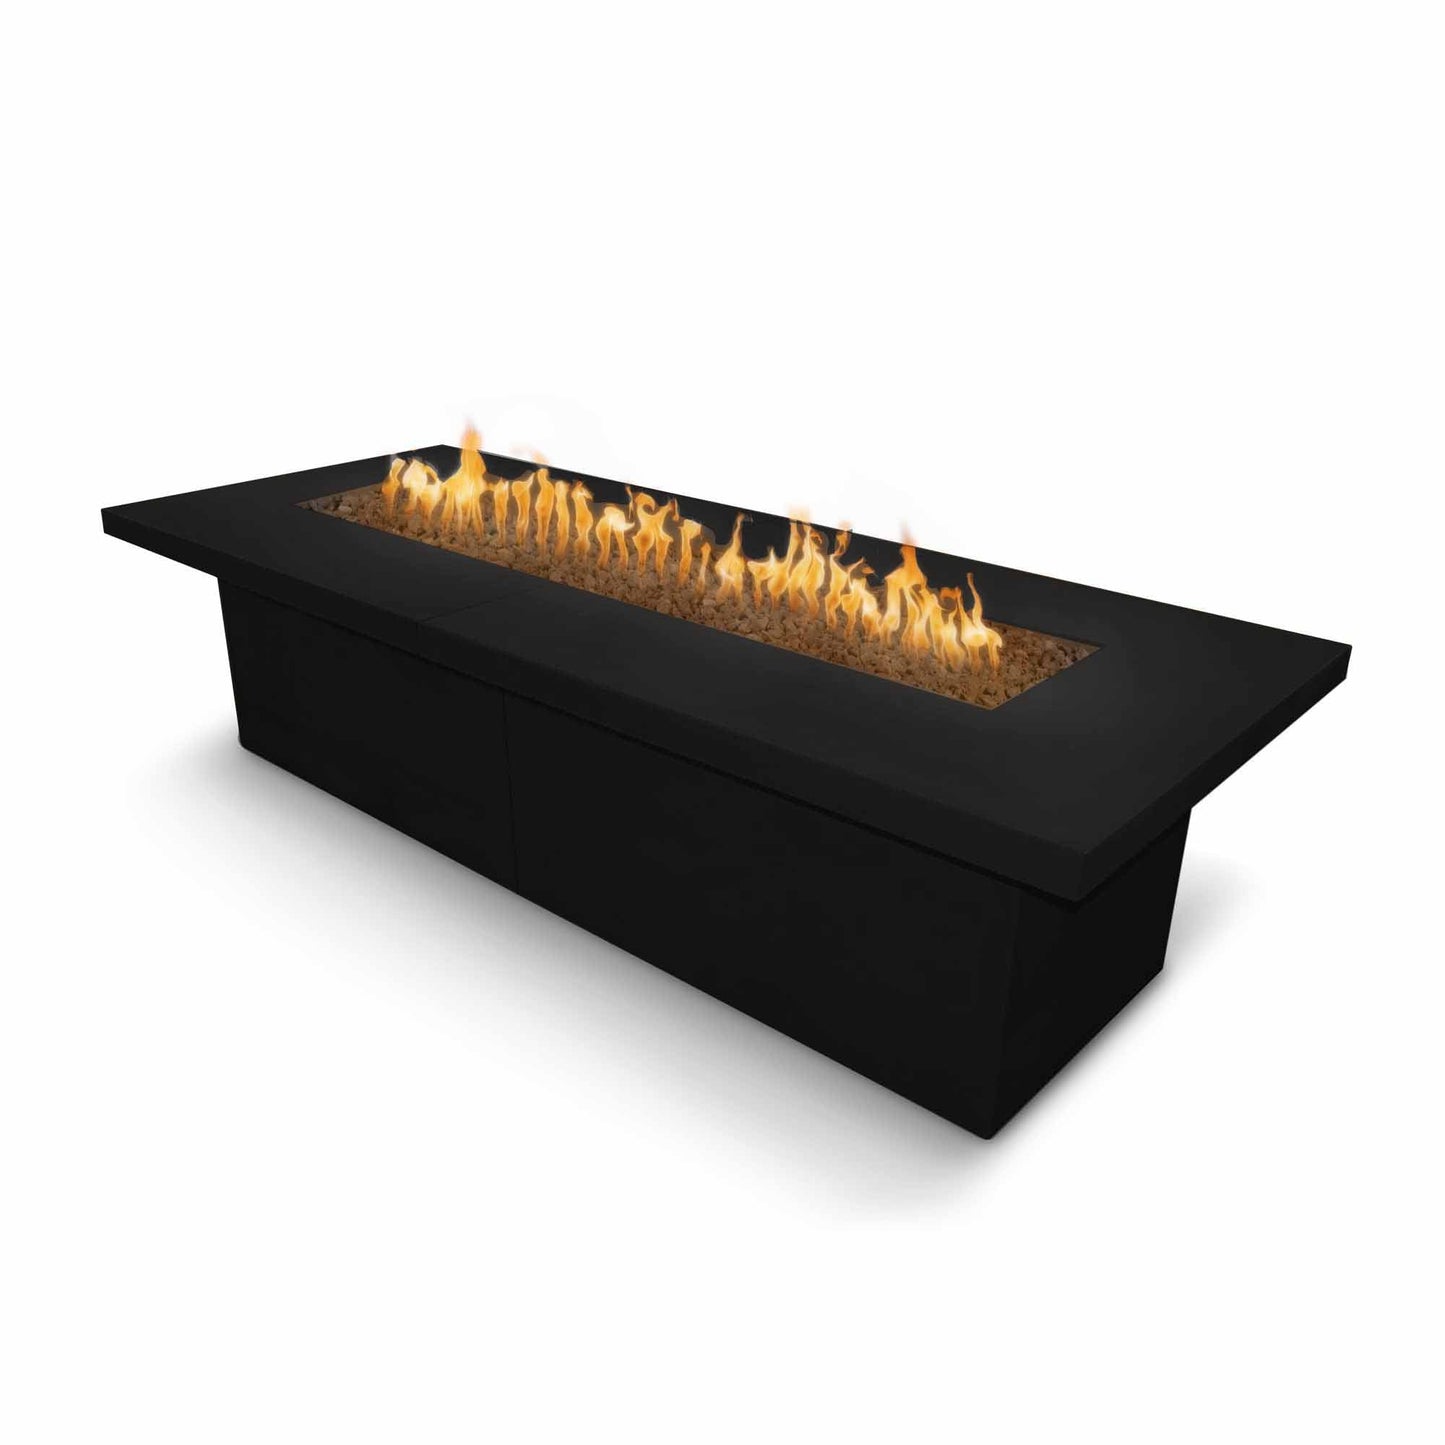 The Outdoor Plus Rectangular Newport 144" Stainless Steel Natural Gas Fire Pit with Match Lit with Flame Sense Ignition